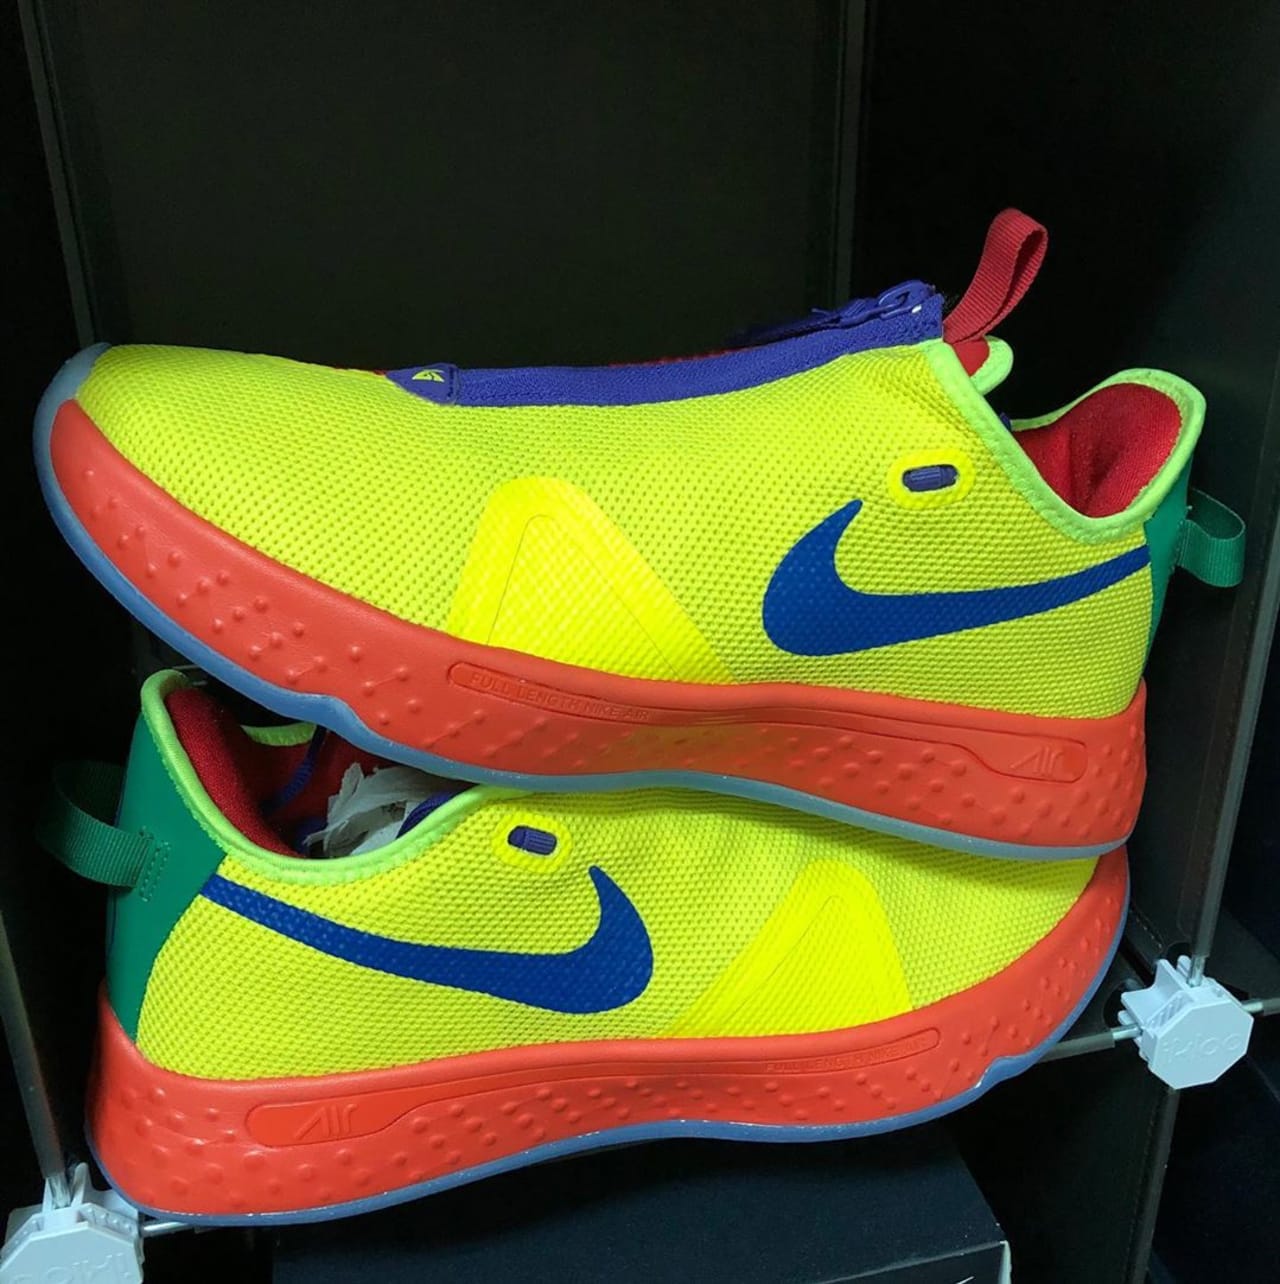 Nike By You iD PG 4 Designs | Sole 